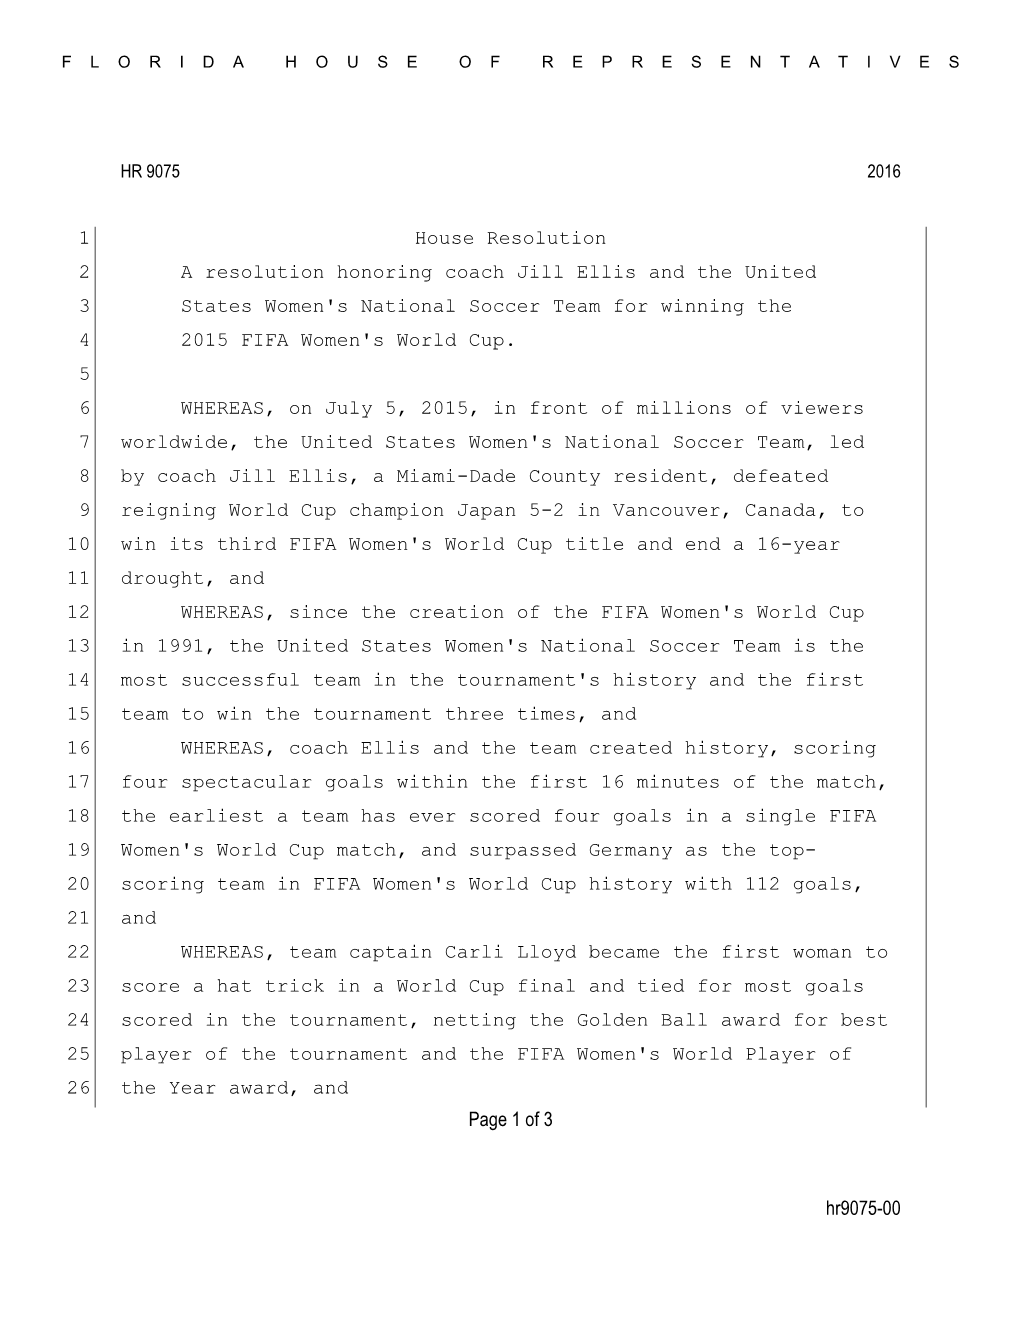 Hr9075-00 Page 1 of 3 House Resolution 1 a Resolution Honoring Coach Jill Ellis and the United 2 States Women's National